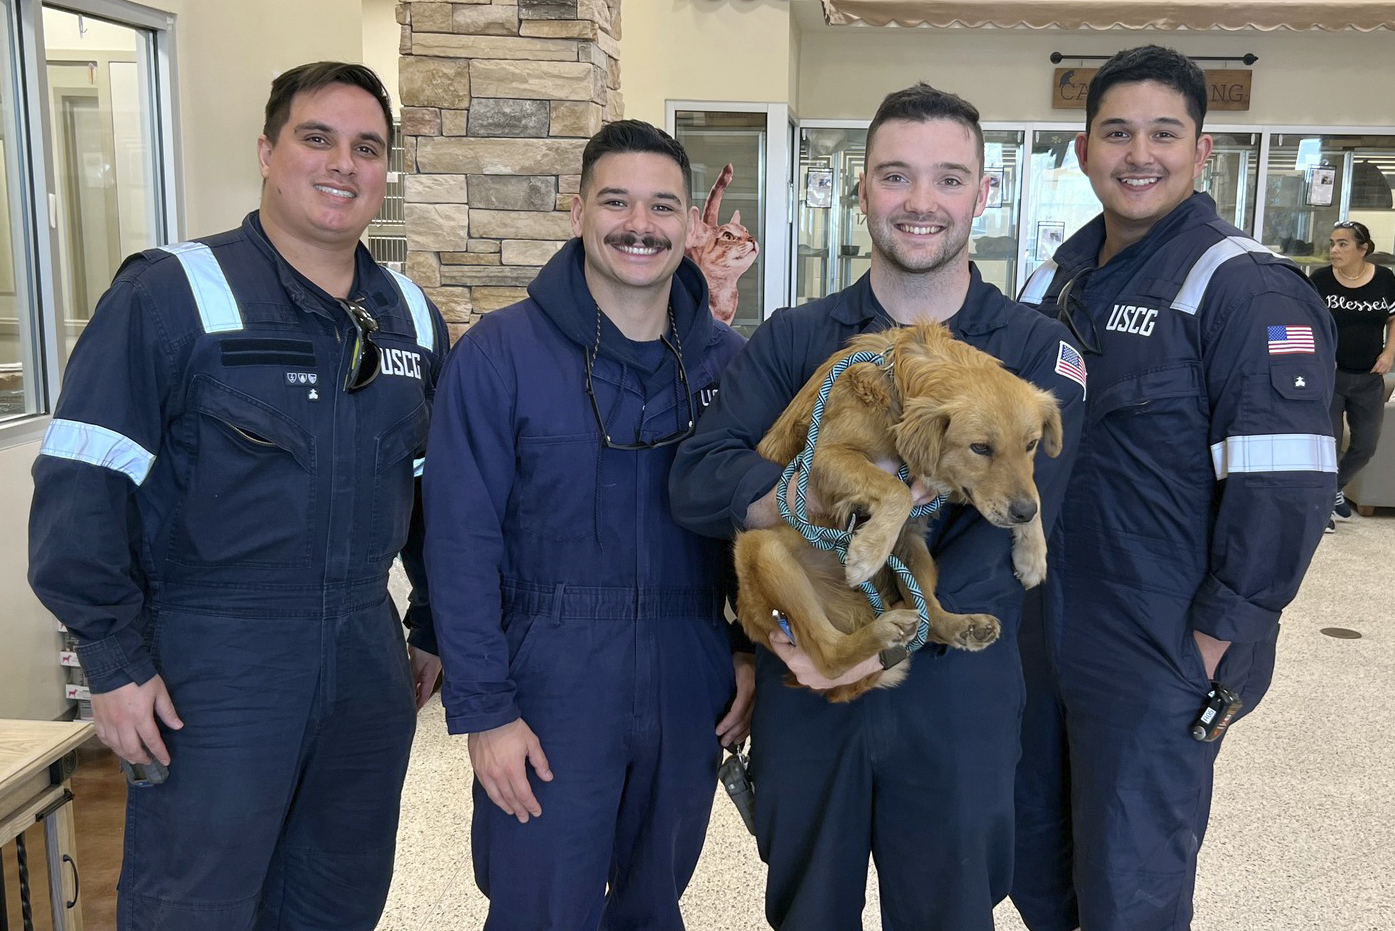 ‘We could see the little dog’s face poking out’: Routine Coast Guard inspection of Houston port rescues dog trapped in shipping container